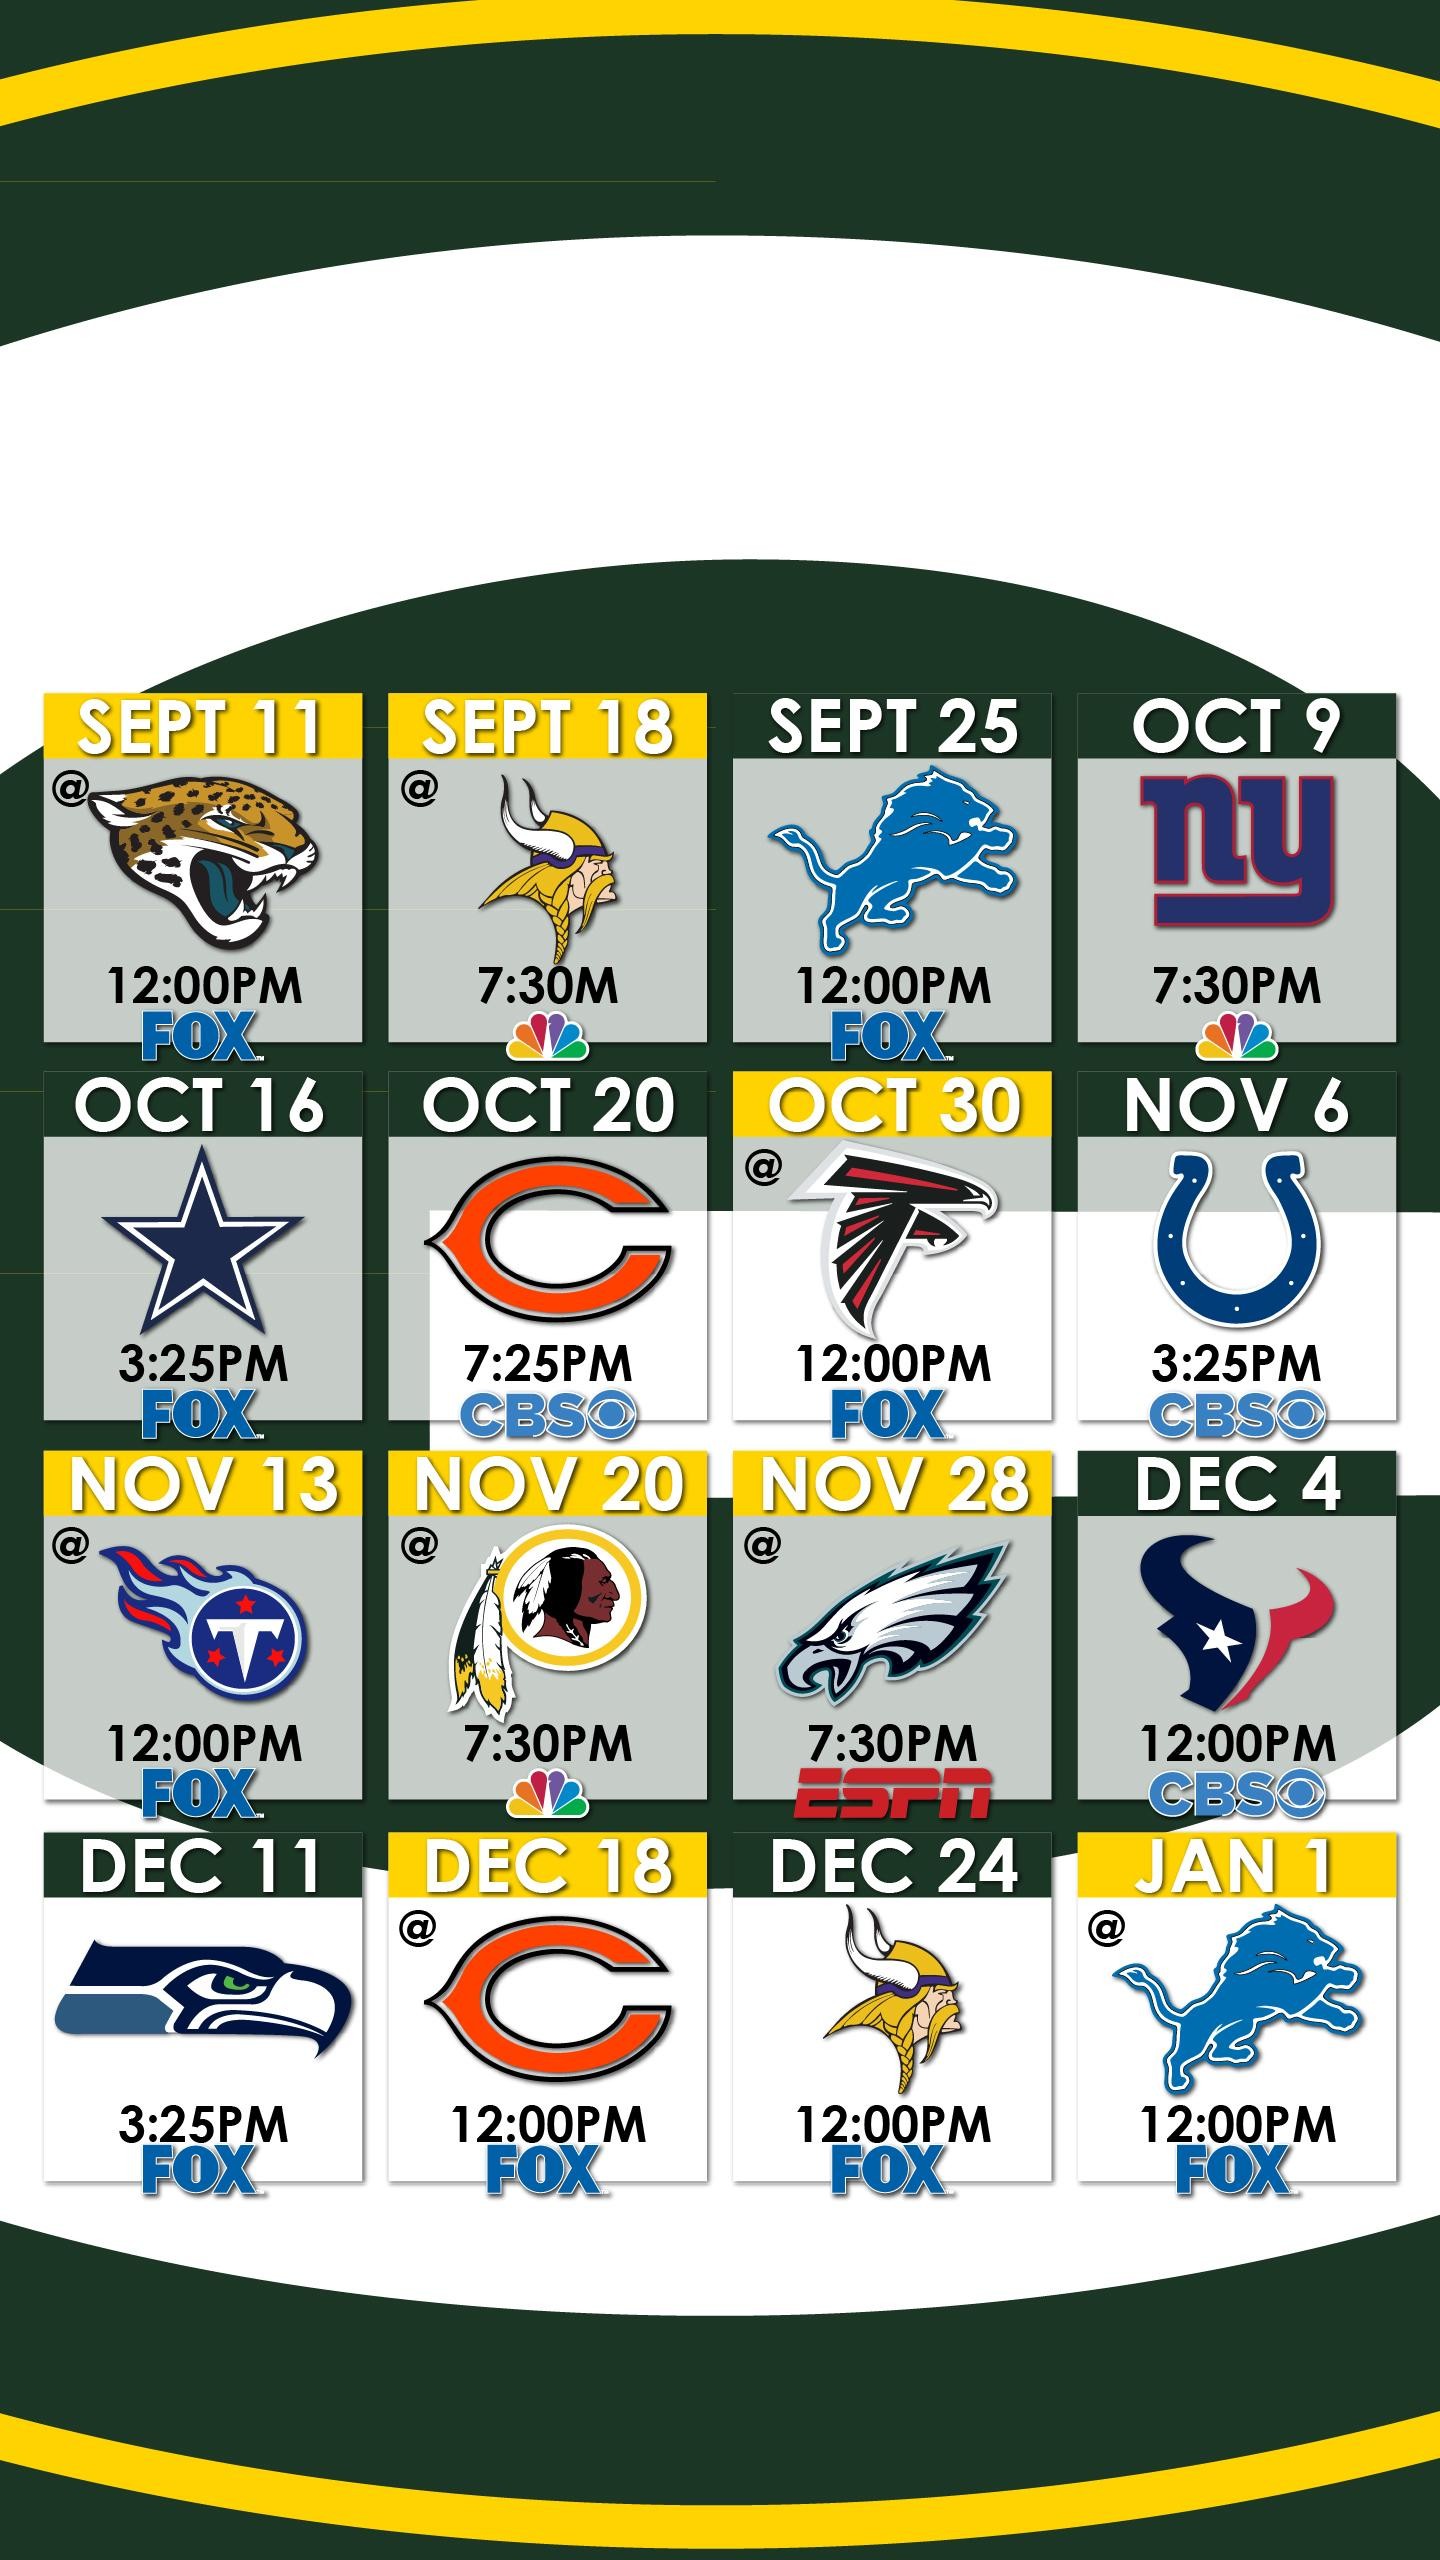 Green Bay Packers Schedule Wallpaper (69+ images)